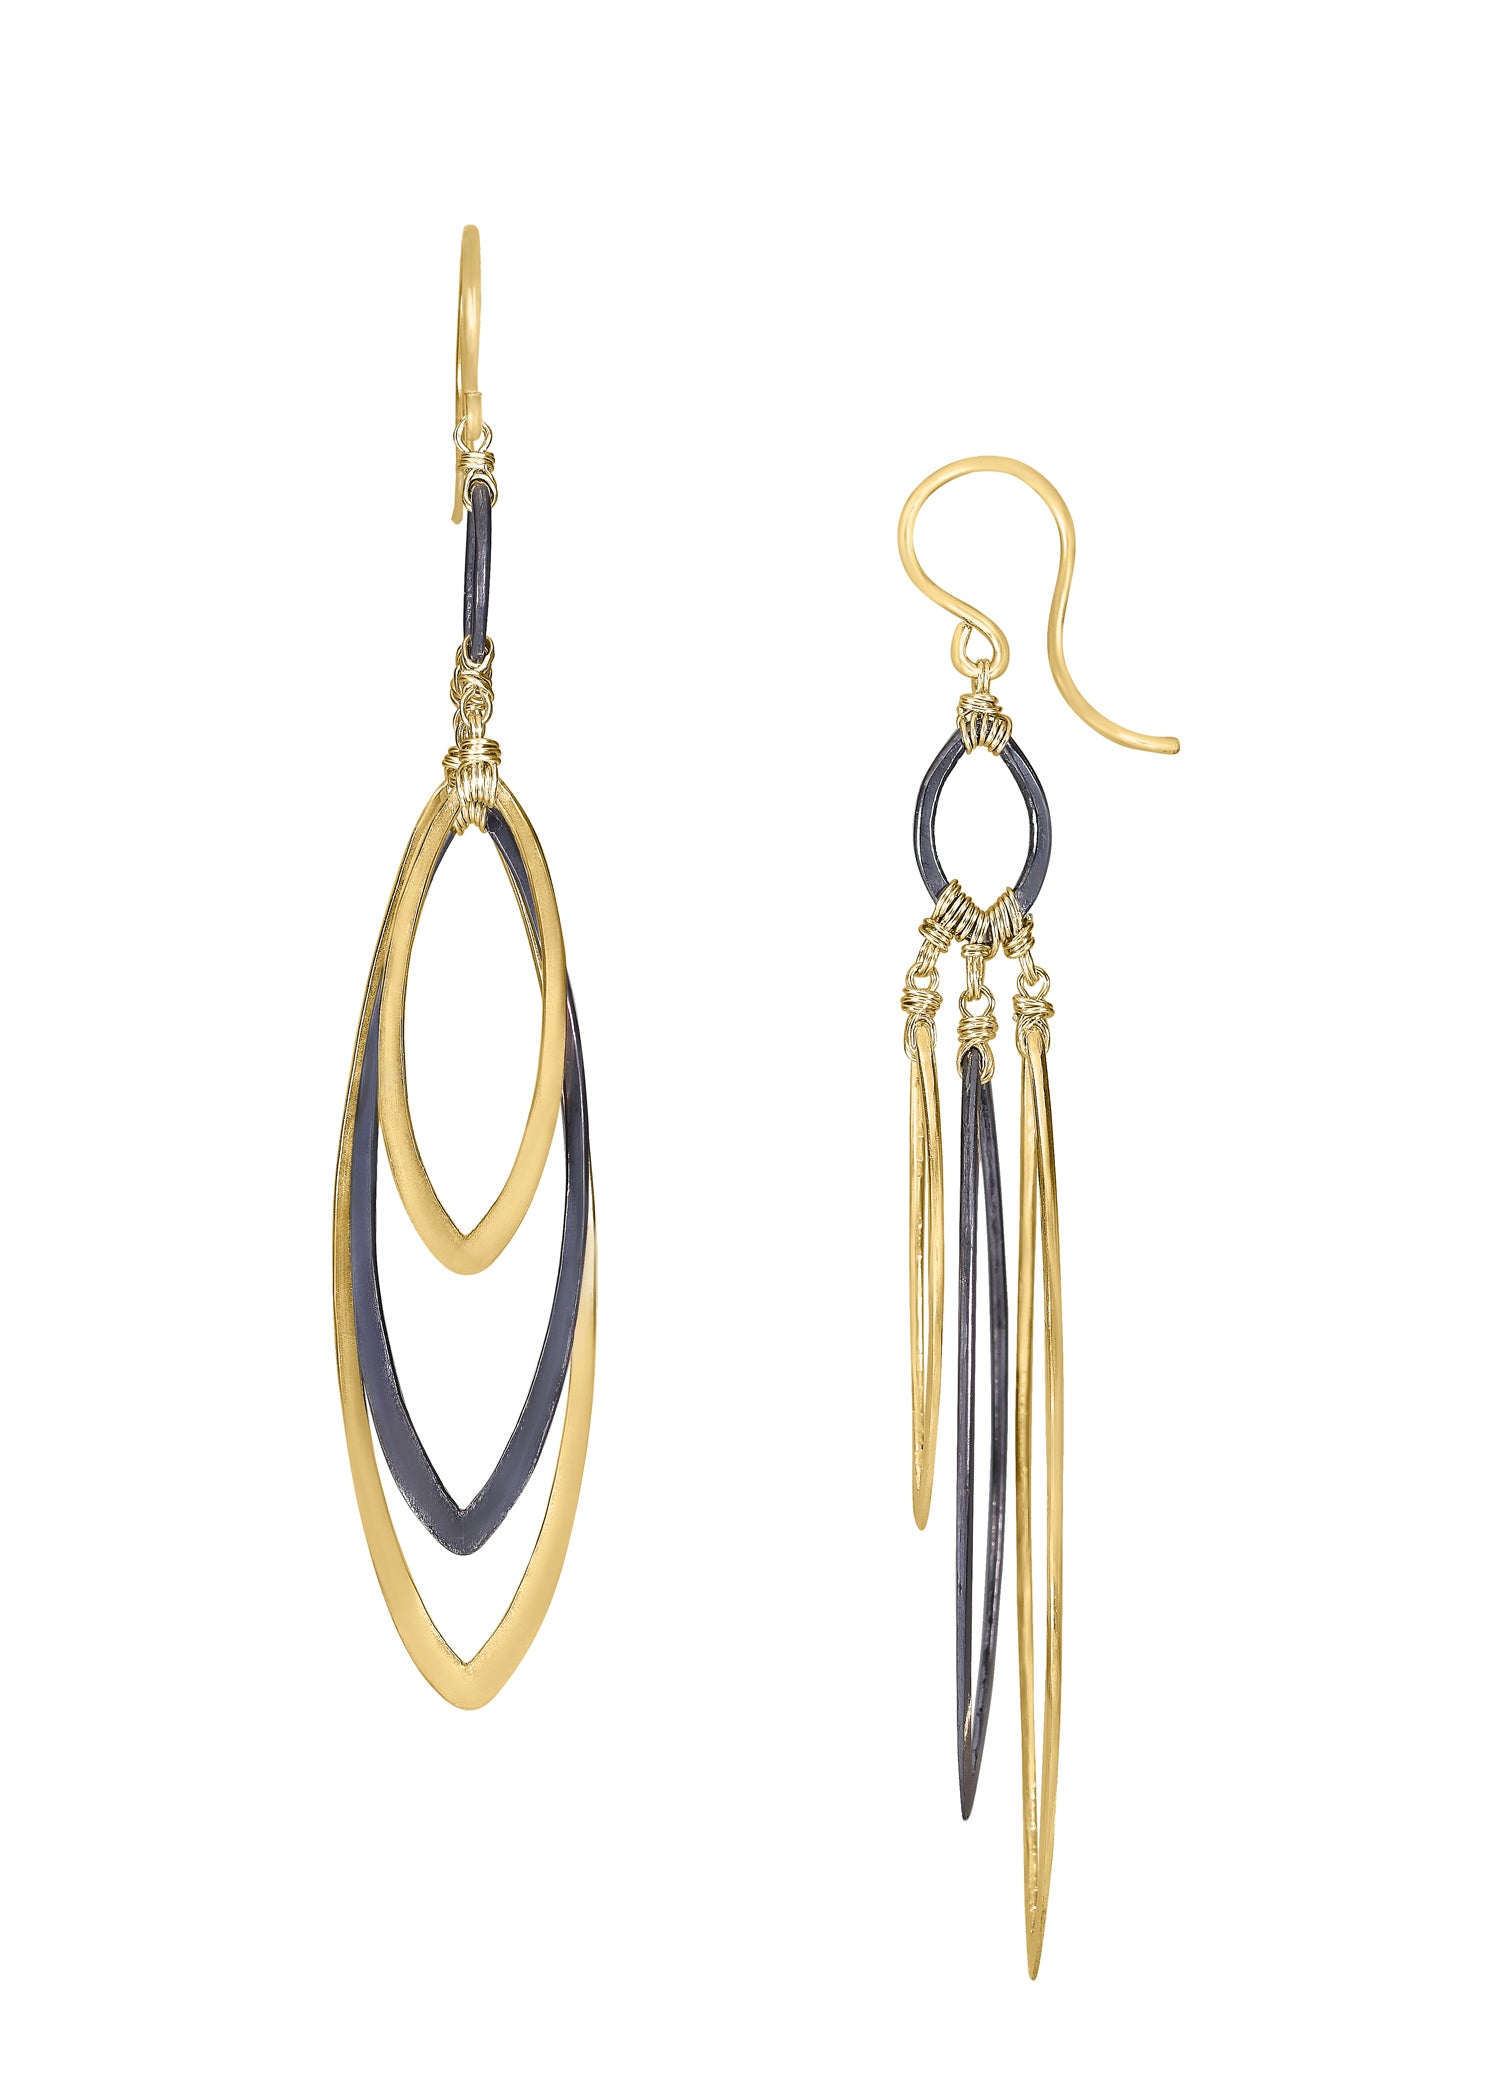 14k gold fill Blackened sterling silver Earrings measure 2-3/4" in length (including the ear wires) and 1/2" in width at the widest point Handmade in our Los Angeles studio